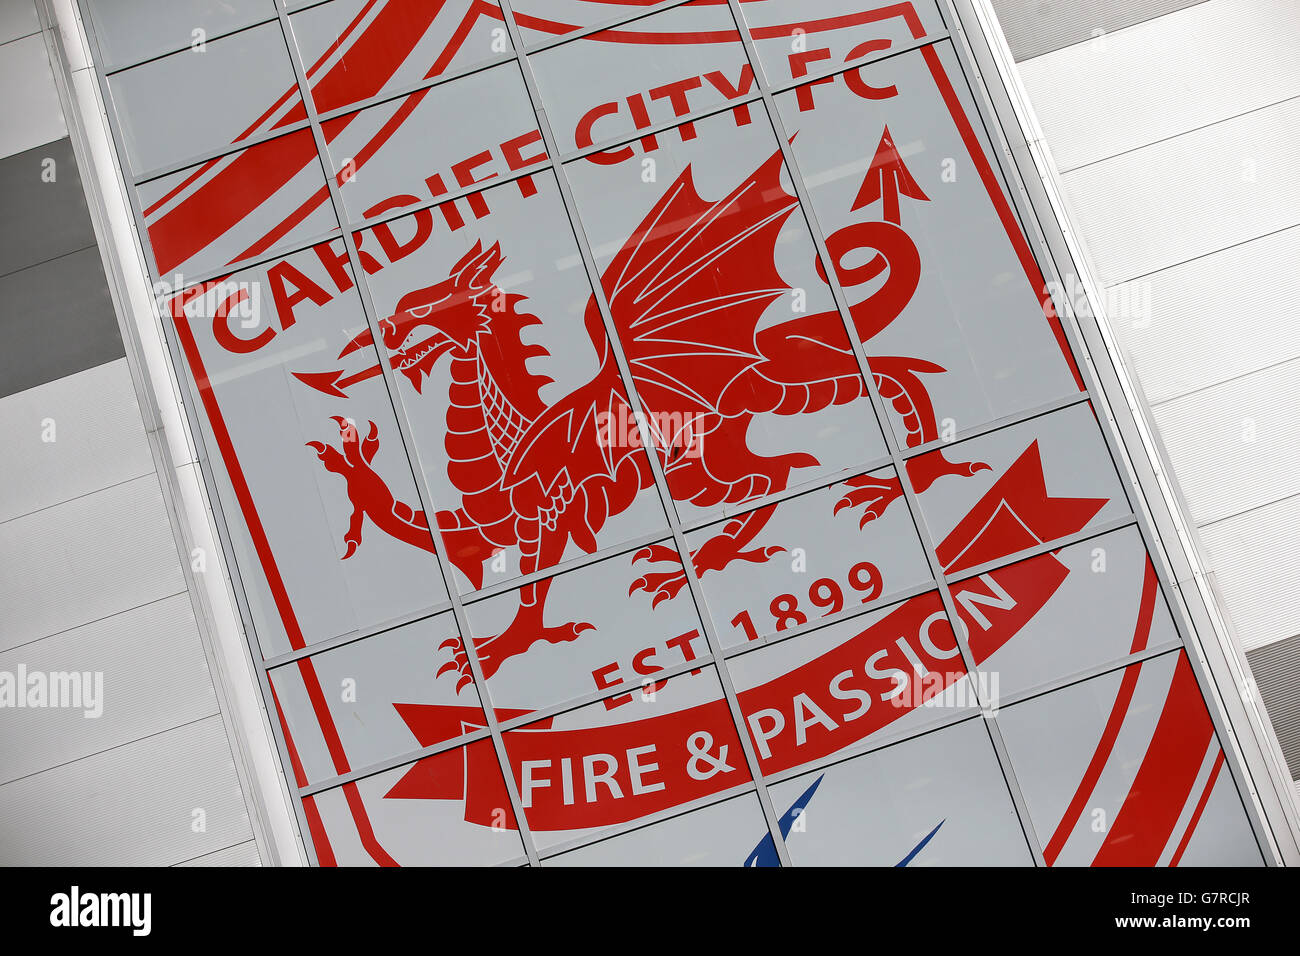 Cardiff City FC - Official Licensed - Professional Dartboard - Crest a